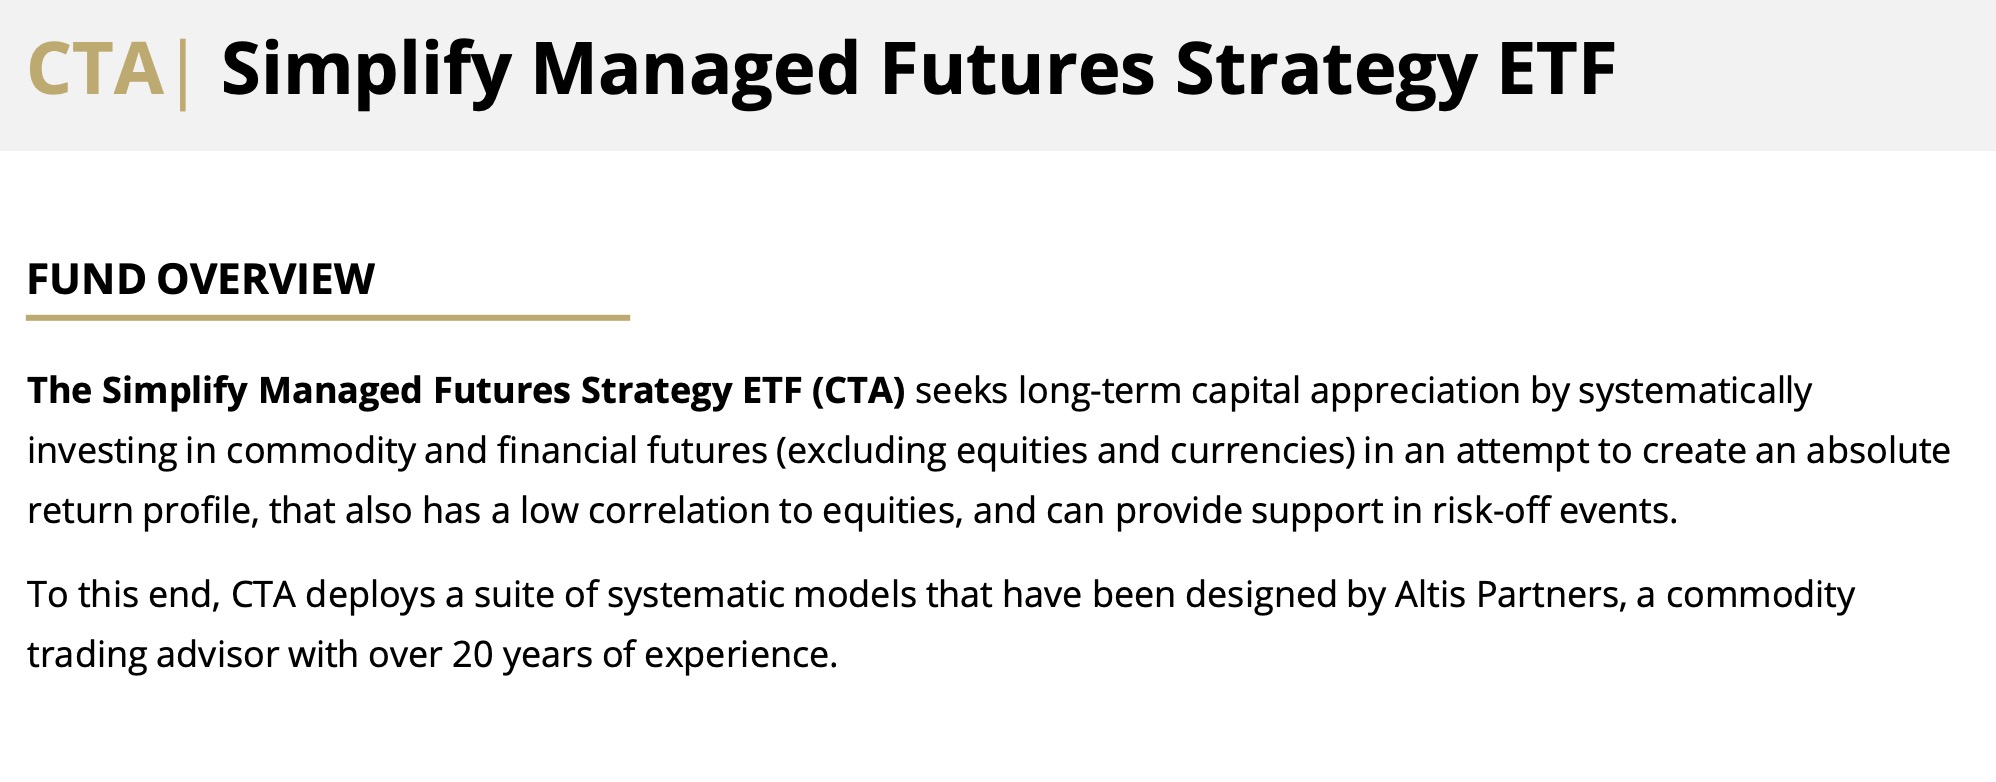 CTA Simplify Managed Futures Strategy ETF Fund Overview 